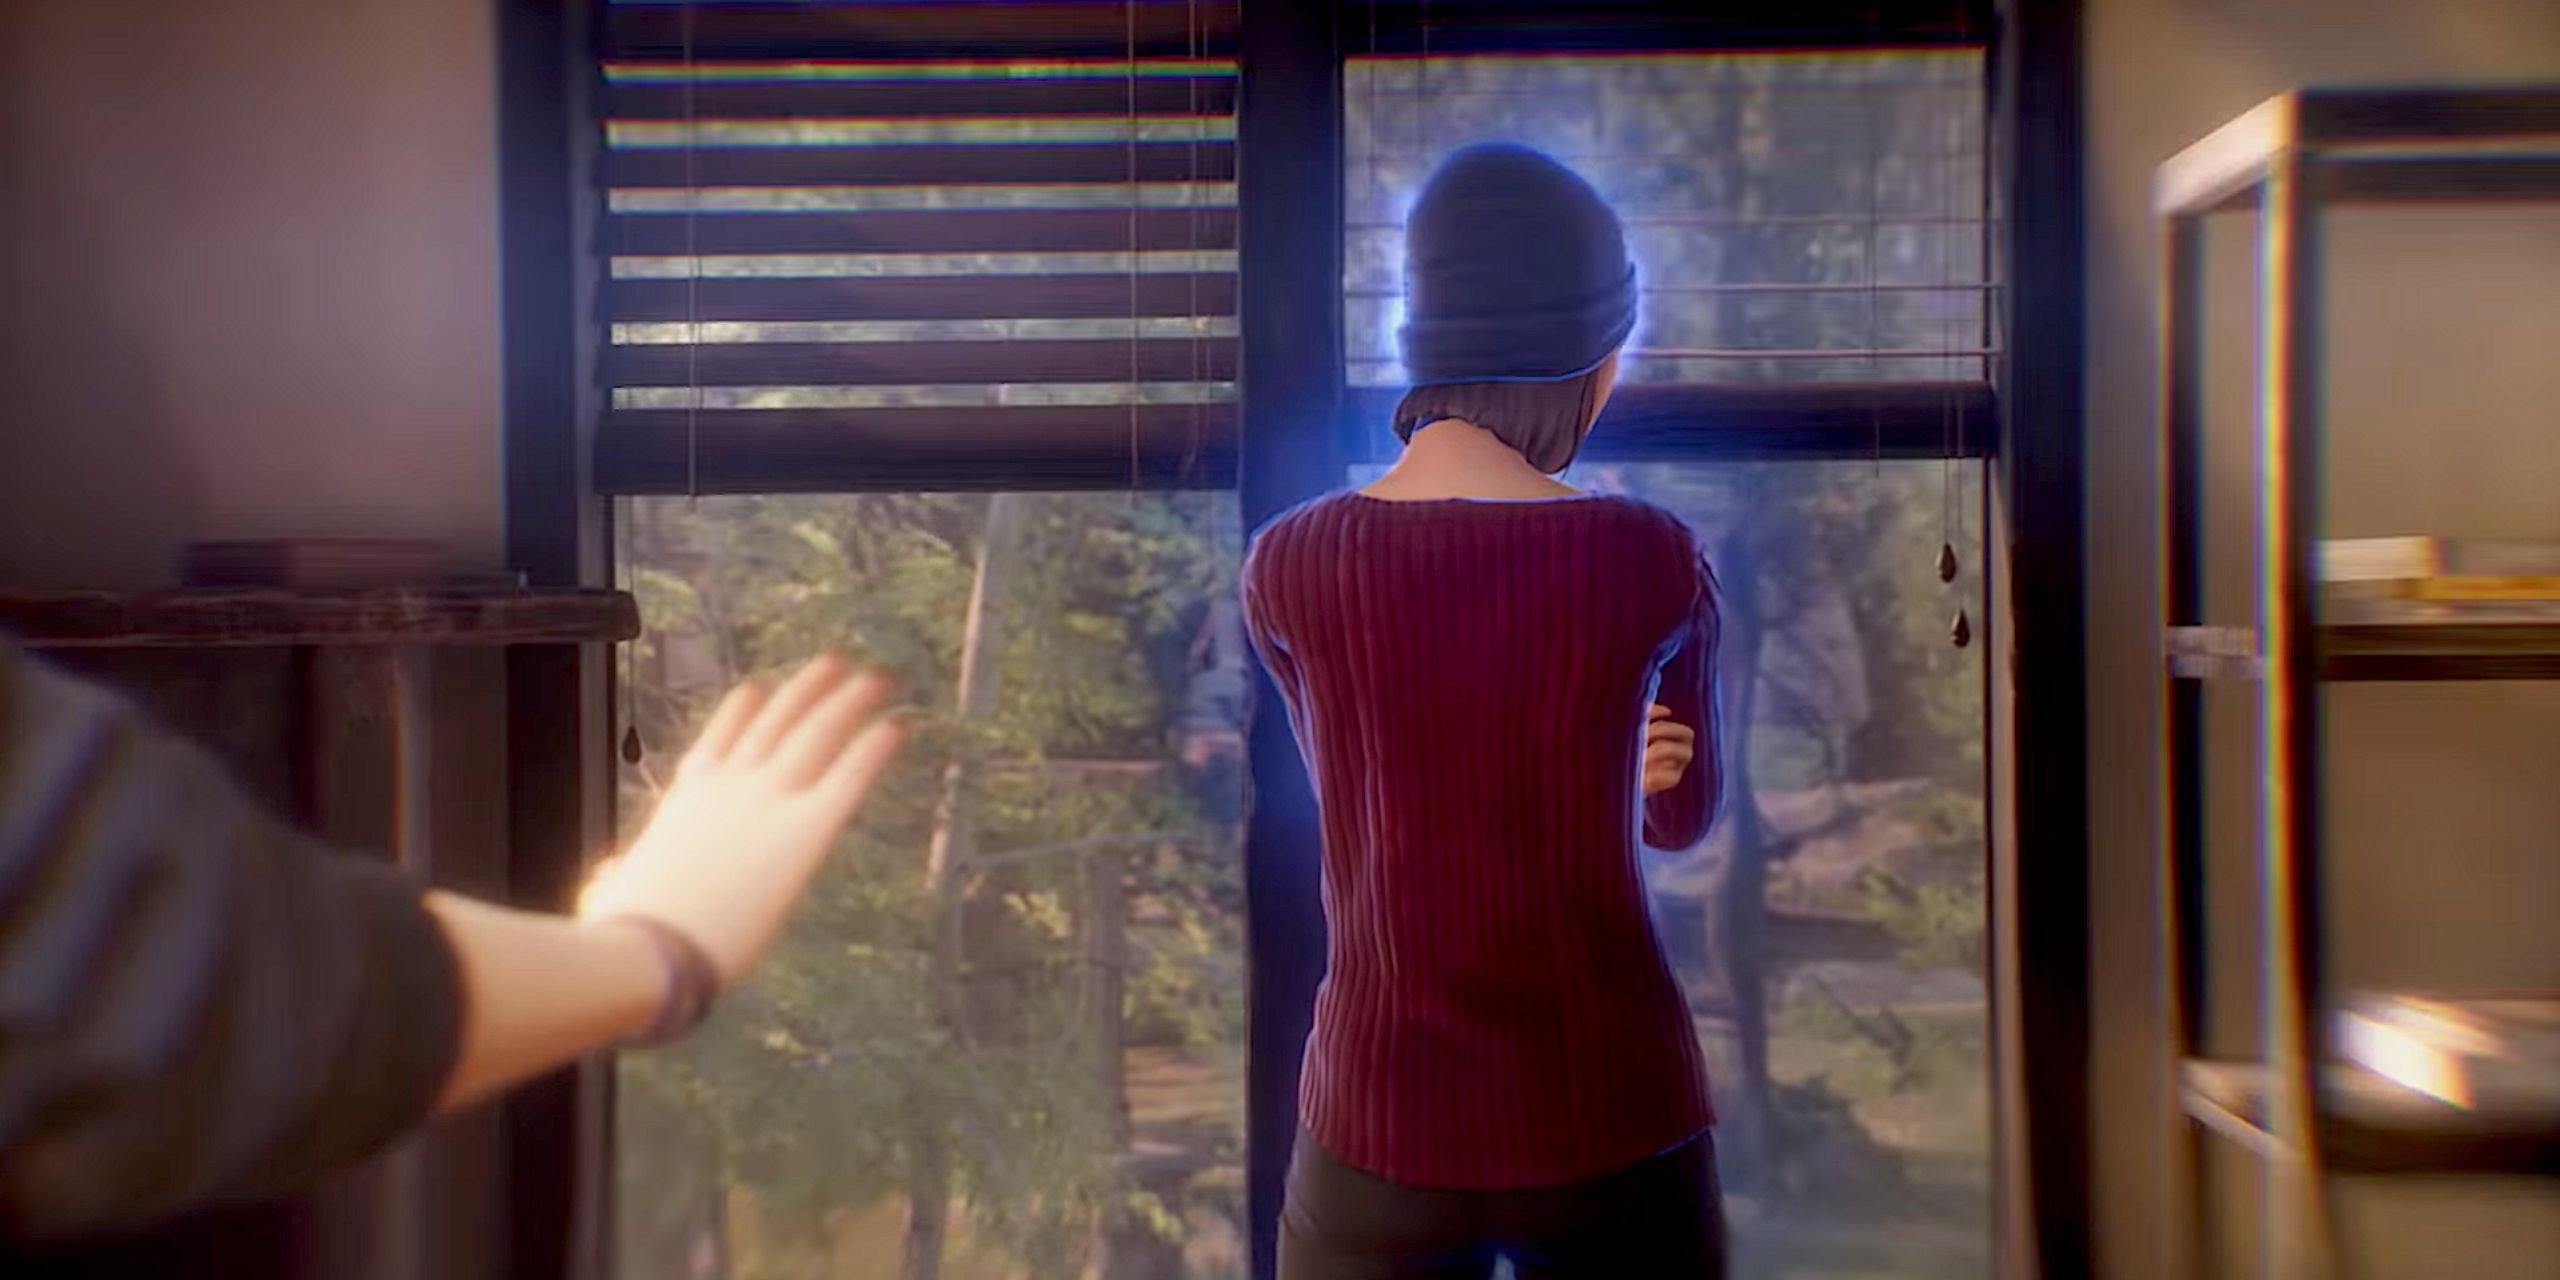 Steph, a young woman with a dark blue beanie and a red shirt, turned away from the viewer. She's surrounded by a hazy blue aura.